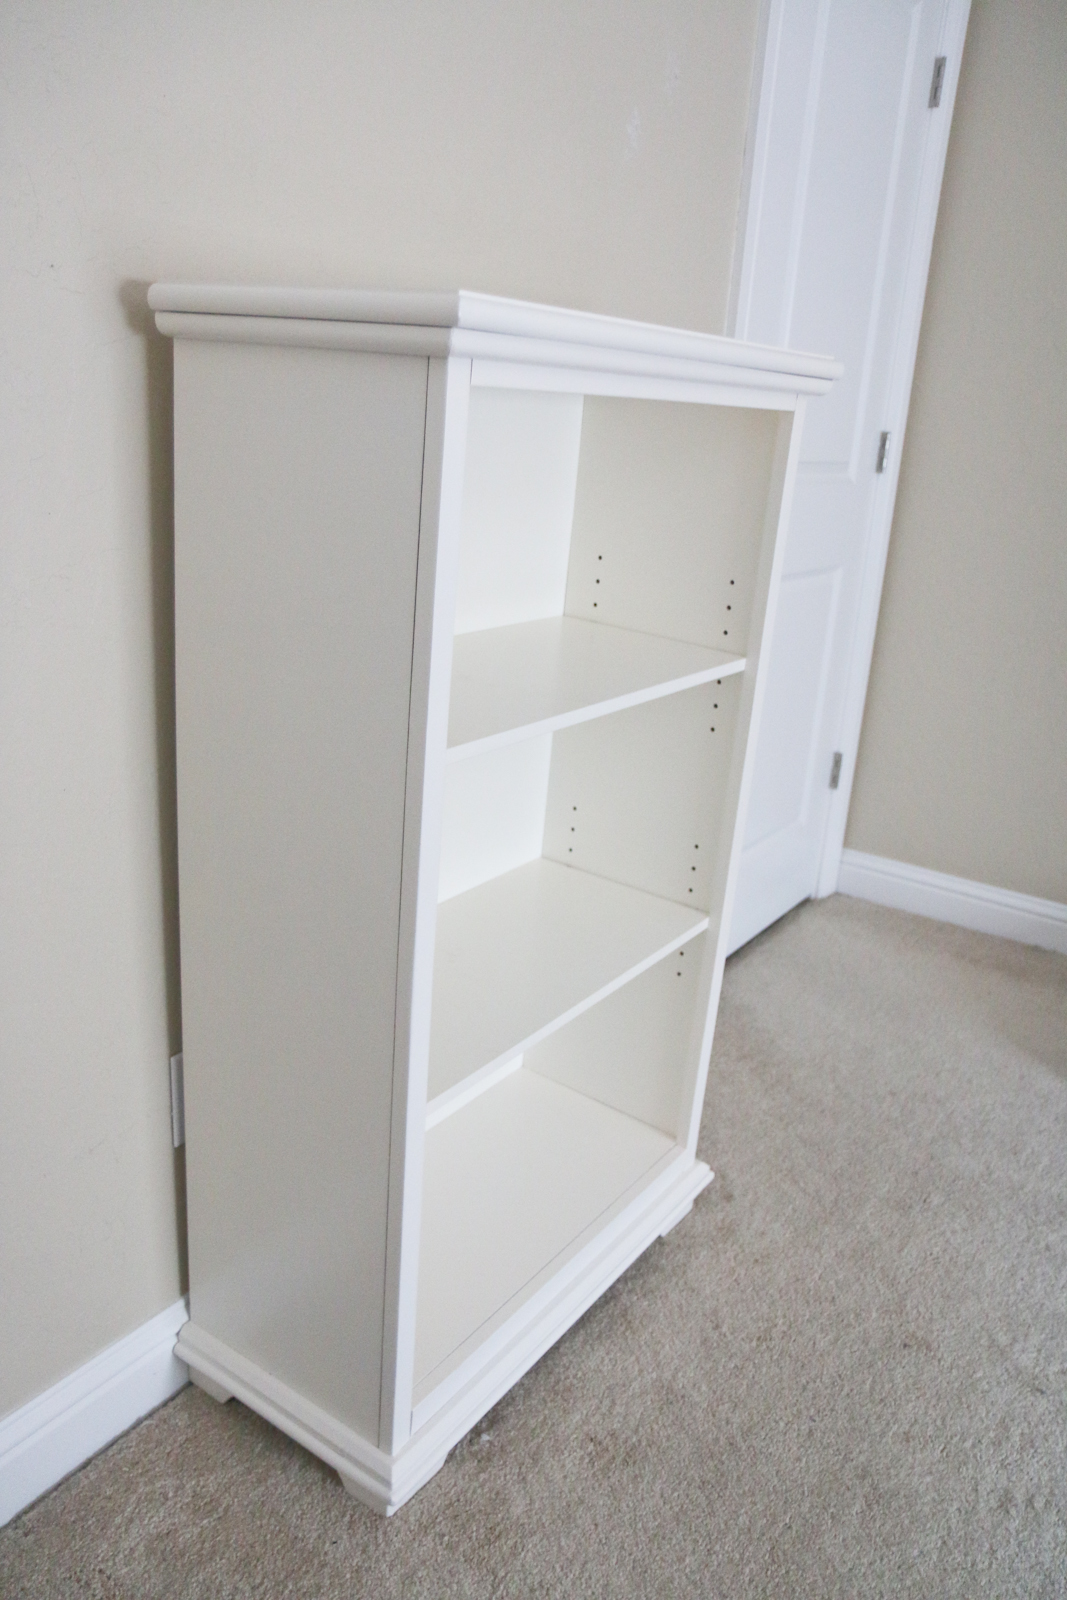 Sandy a la Mode | Blogger - DownEast Home Bookcase to DIY Baby Girl's Accessory Holder